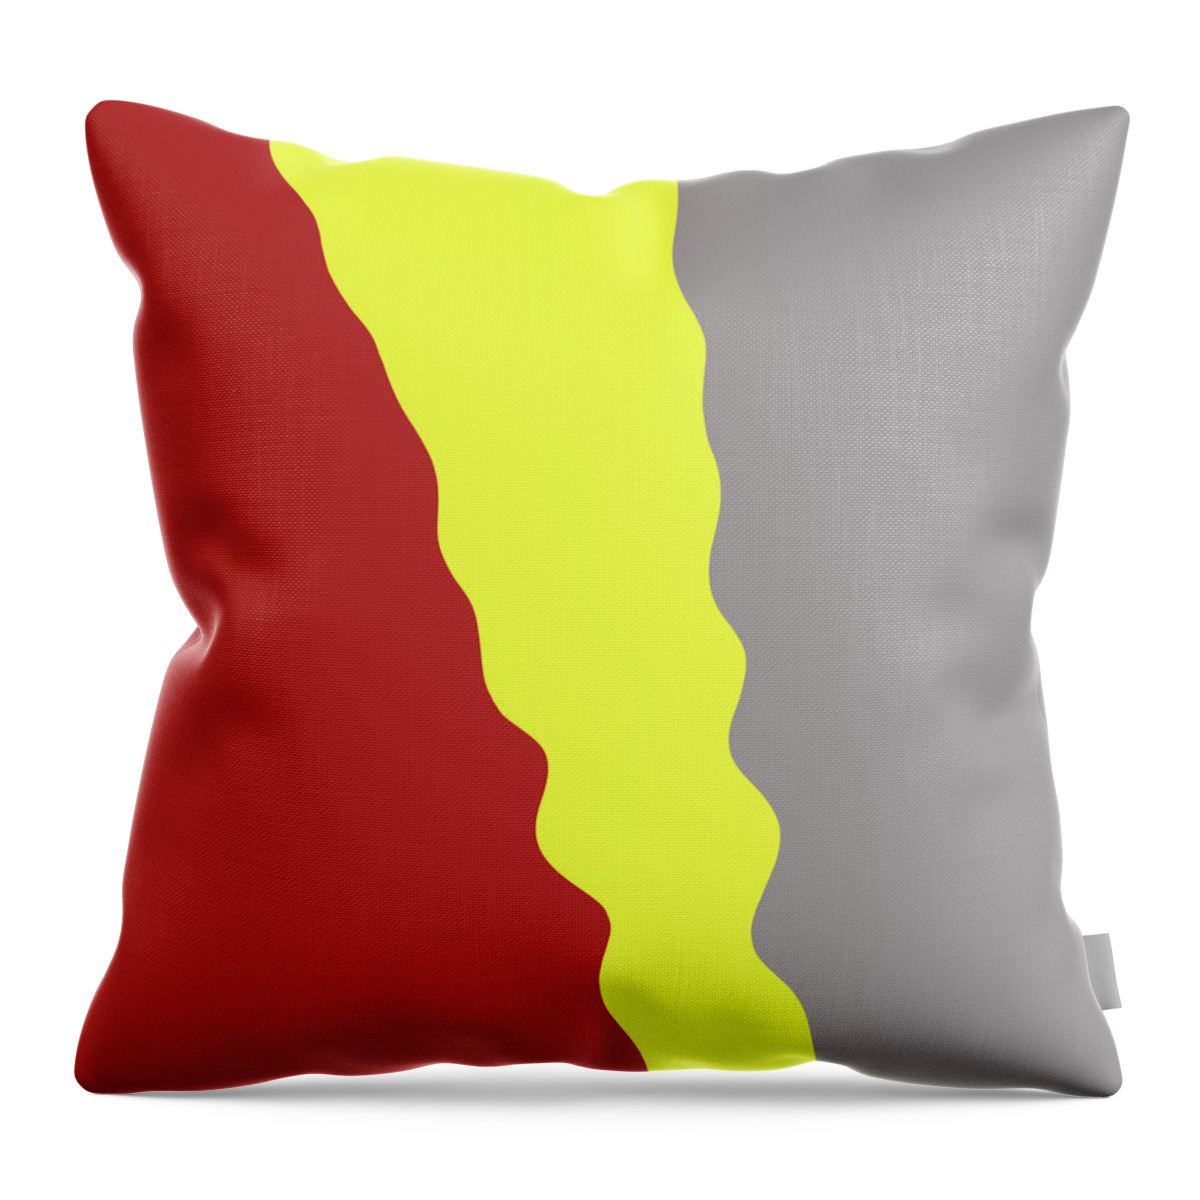 2021 Throw Pillow featuring the digital art 2021 Trend Color of the Year with March Color of the Month by Delynn Addams